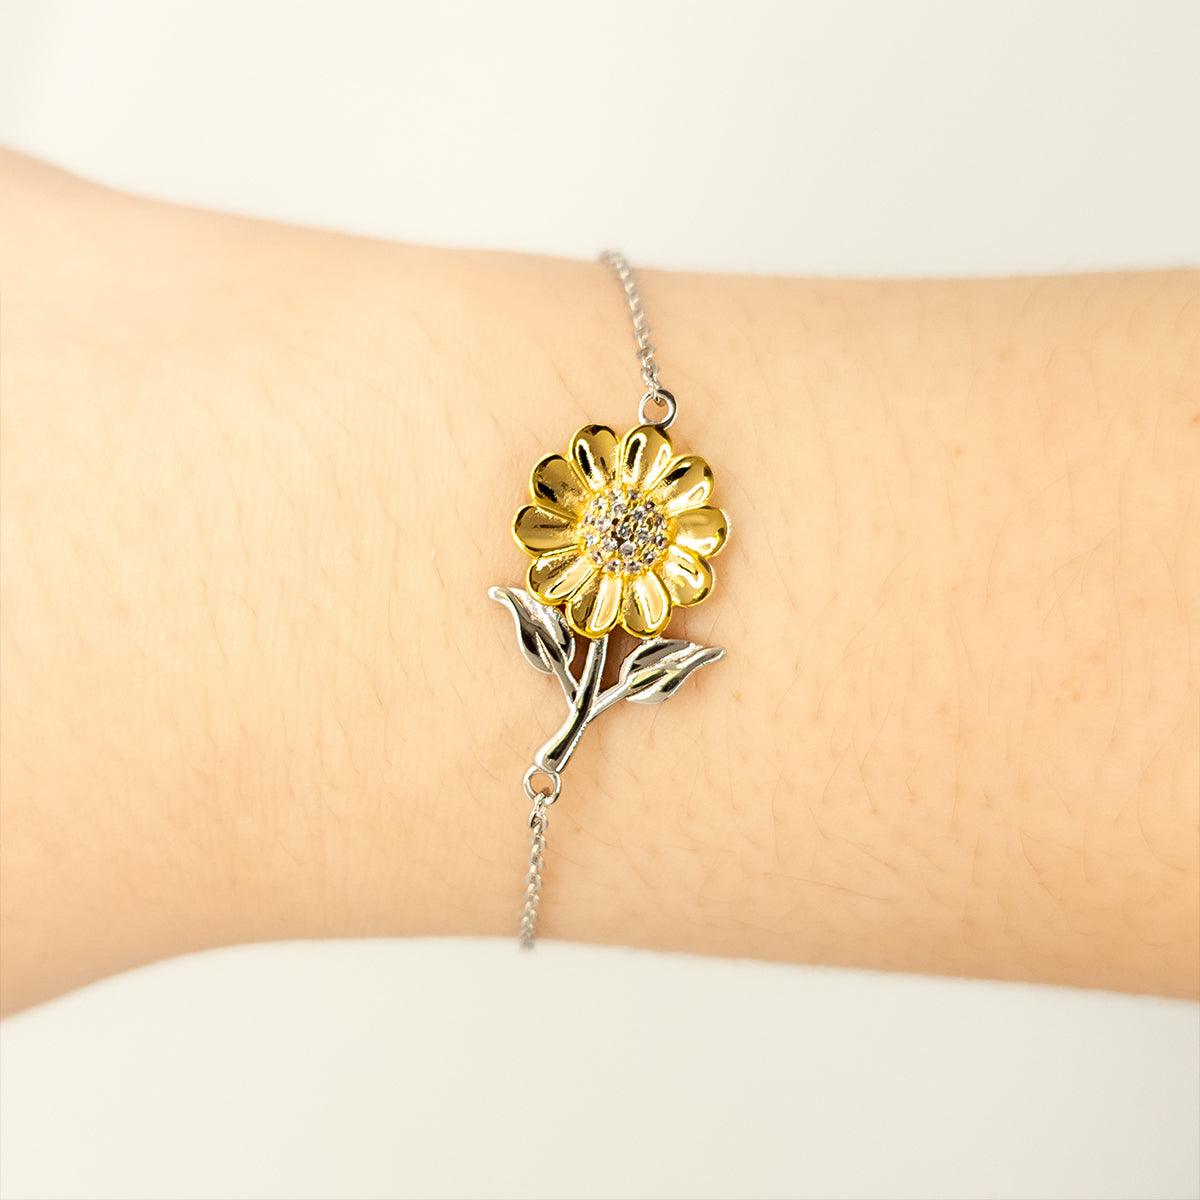 Remarkable Mortician Gifts, Your dedication and hard work, Inspirational Birthday Christmas Unique Sunflower Bracelet For Mortician, Coworkers, Men, Women, Friends - Mallard Moon Gift Shop